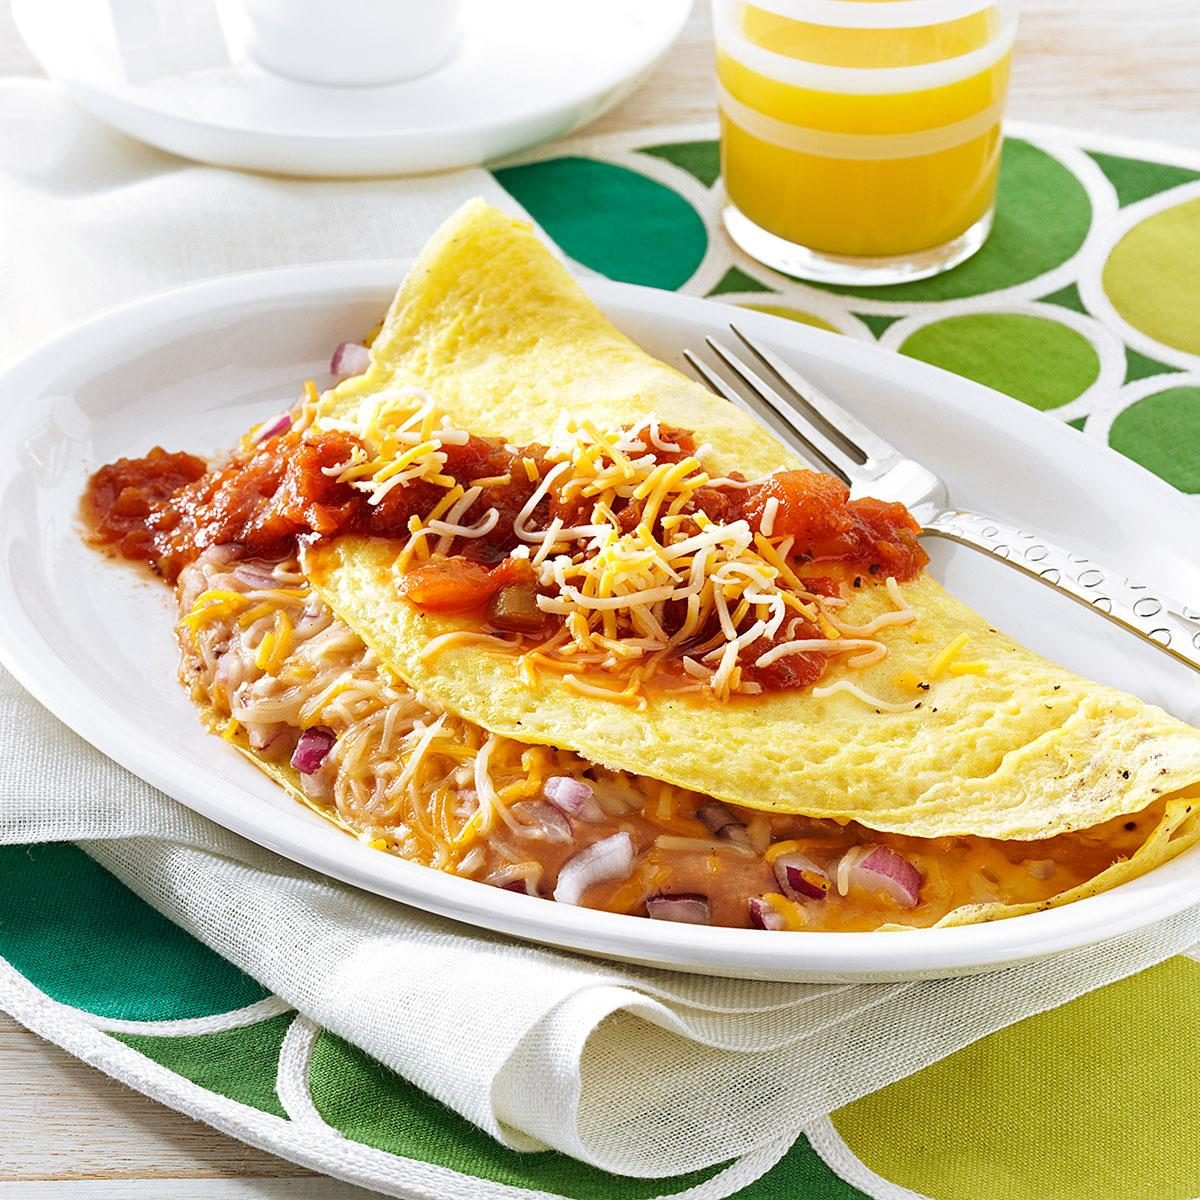 Spanish Omelet Recipe: How to Make It